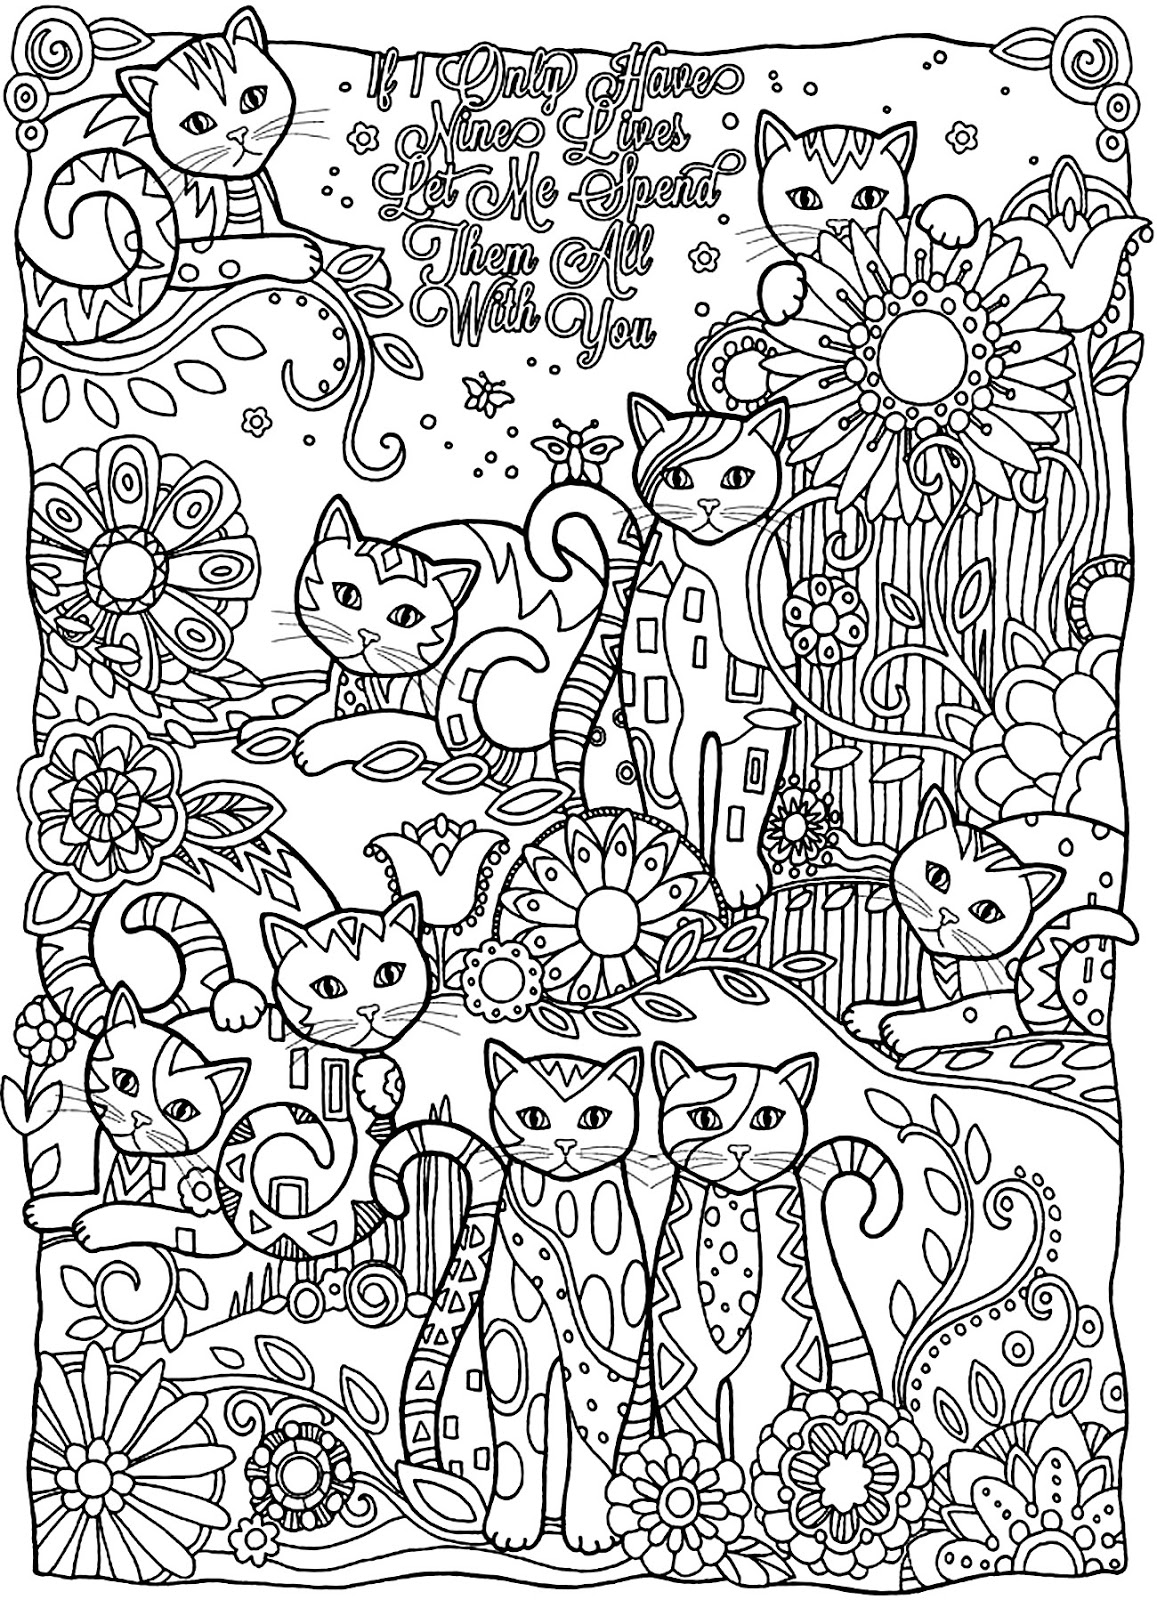 Download Coloring Page World: If I Only Have Nine Lives Let Me Spend Them All With You